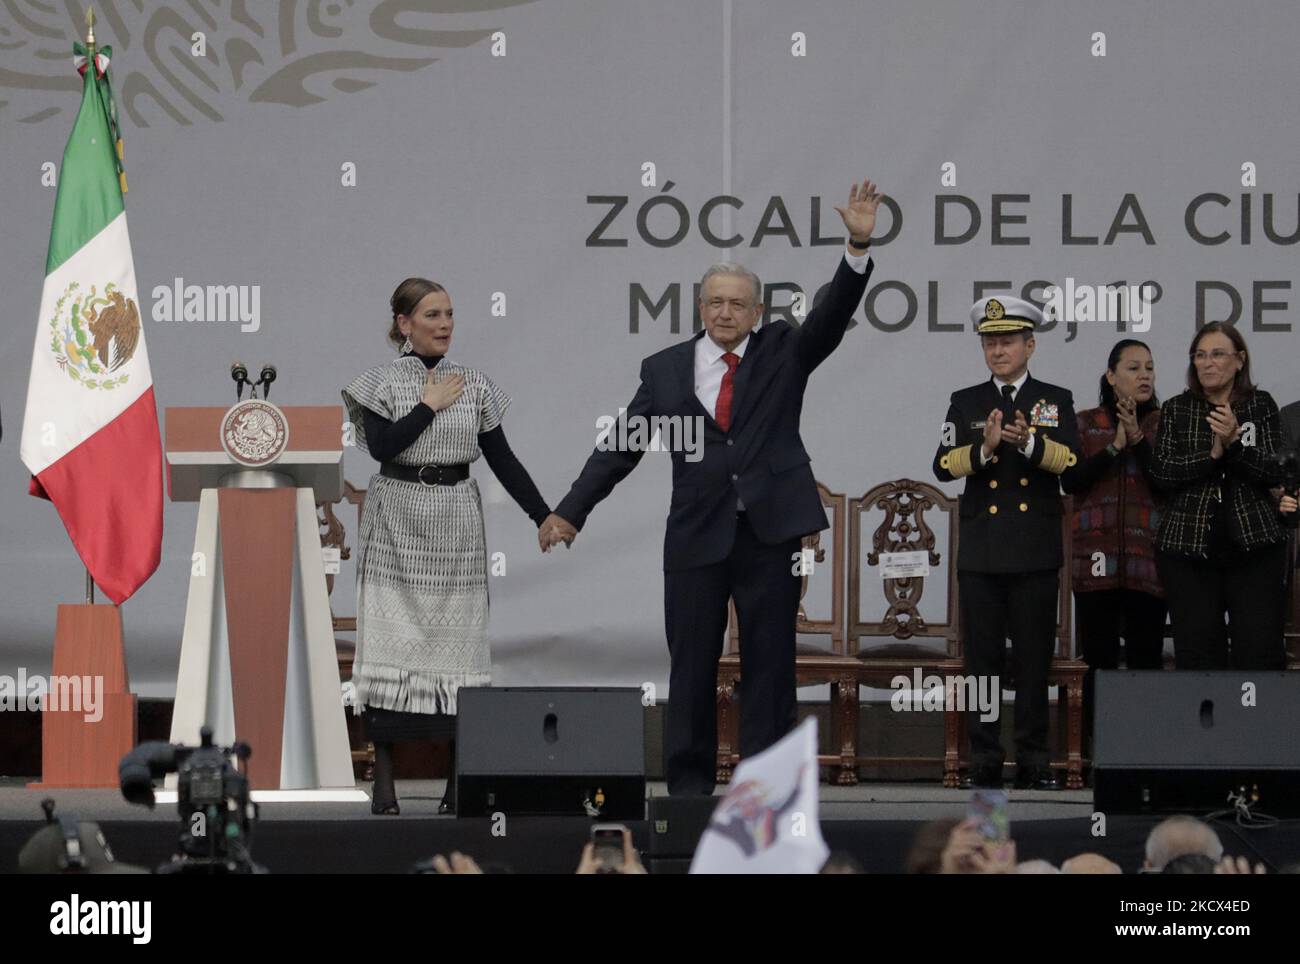 Andrés Manuel López Obrador, President of Mexico, accompanied by his wife Beatriz Gutiérrez Müller, before his message to more than 200,000 people in the Zócalo in Mexico City on the occasion of his third year in office. (Photo by Gerardo Vieyra/NurPhoto) Stock Photo